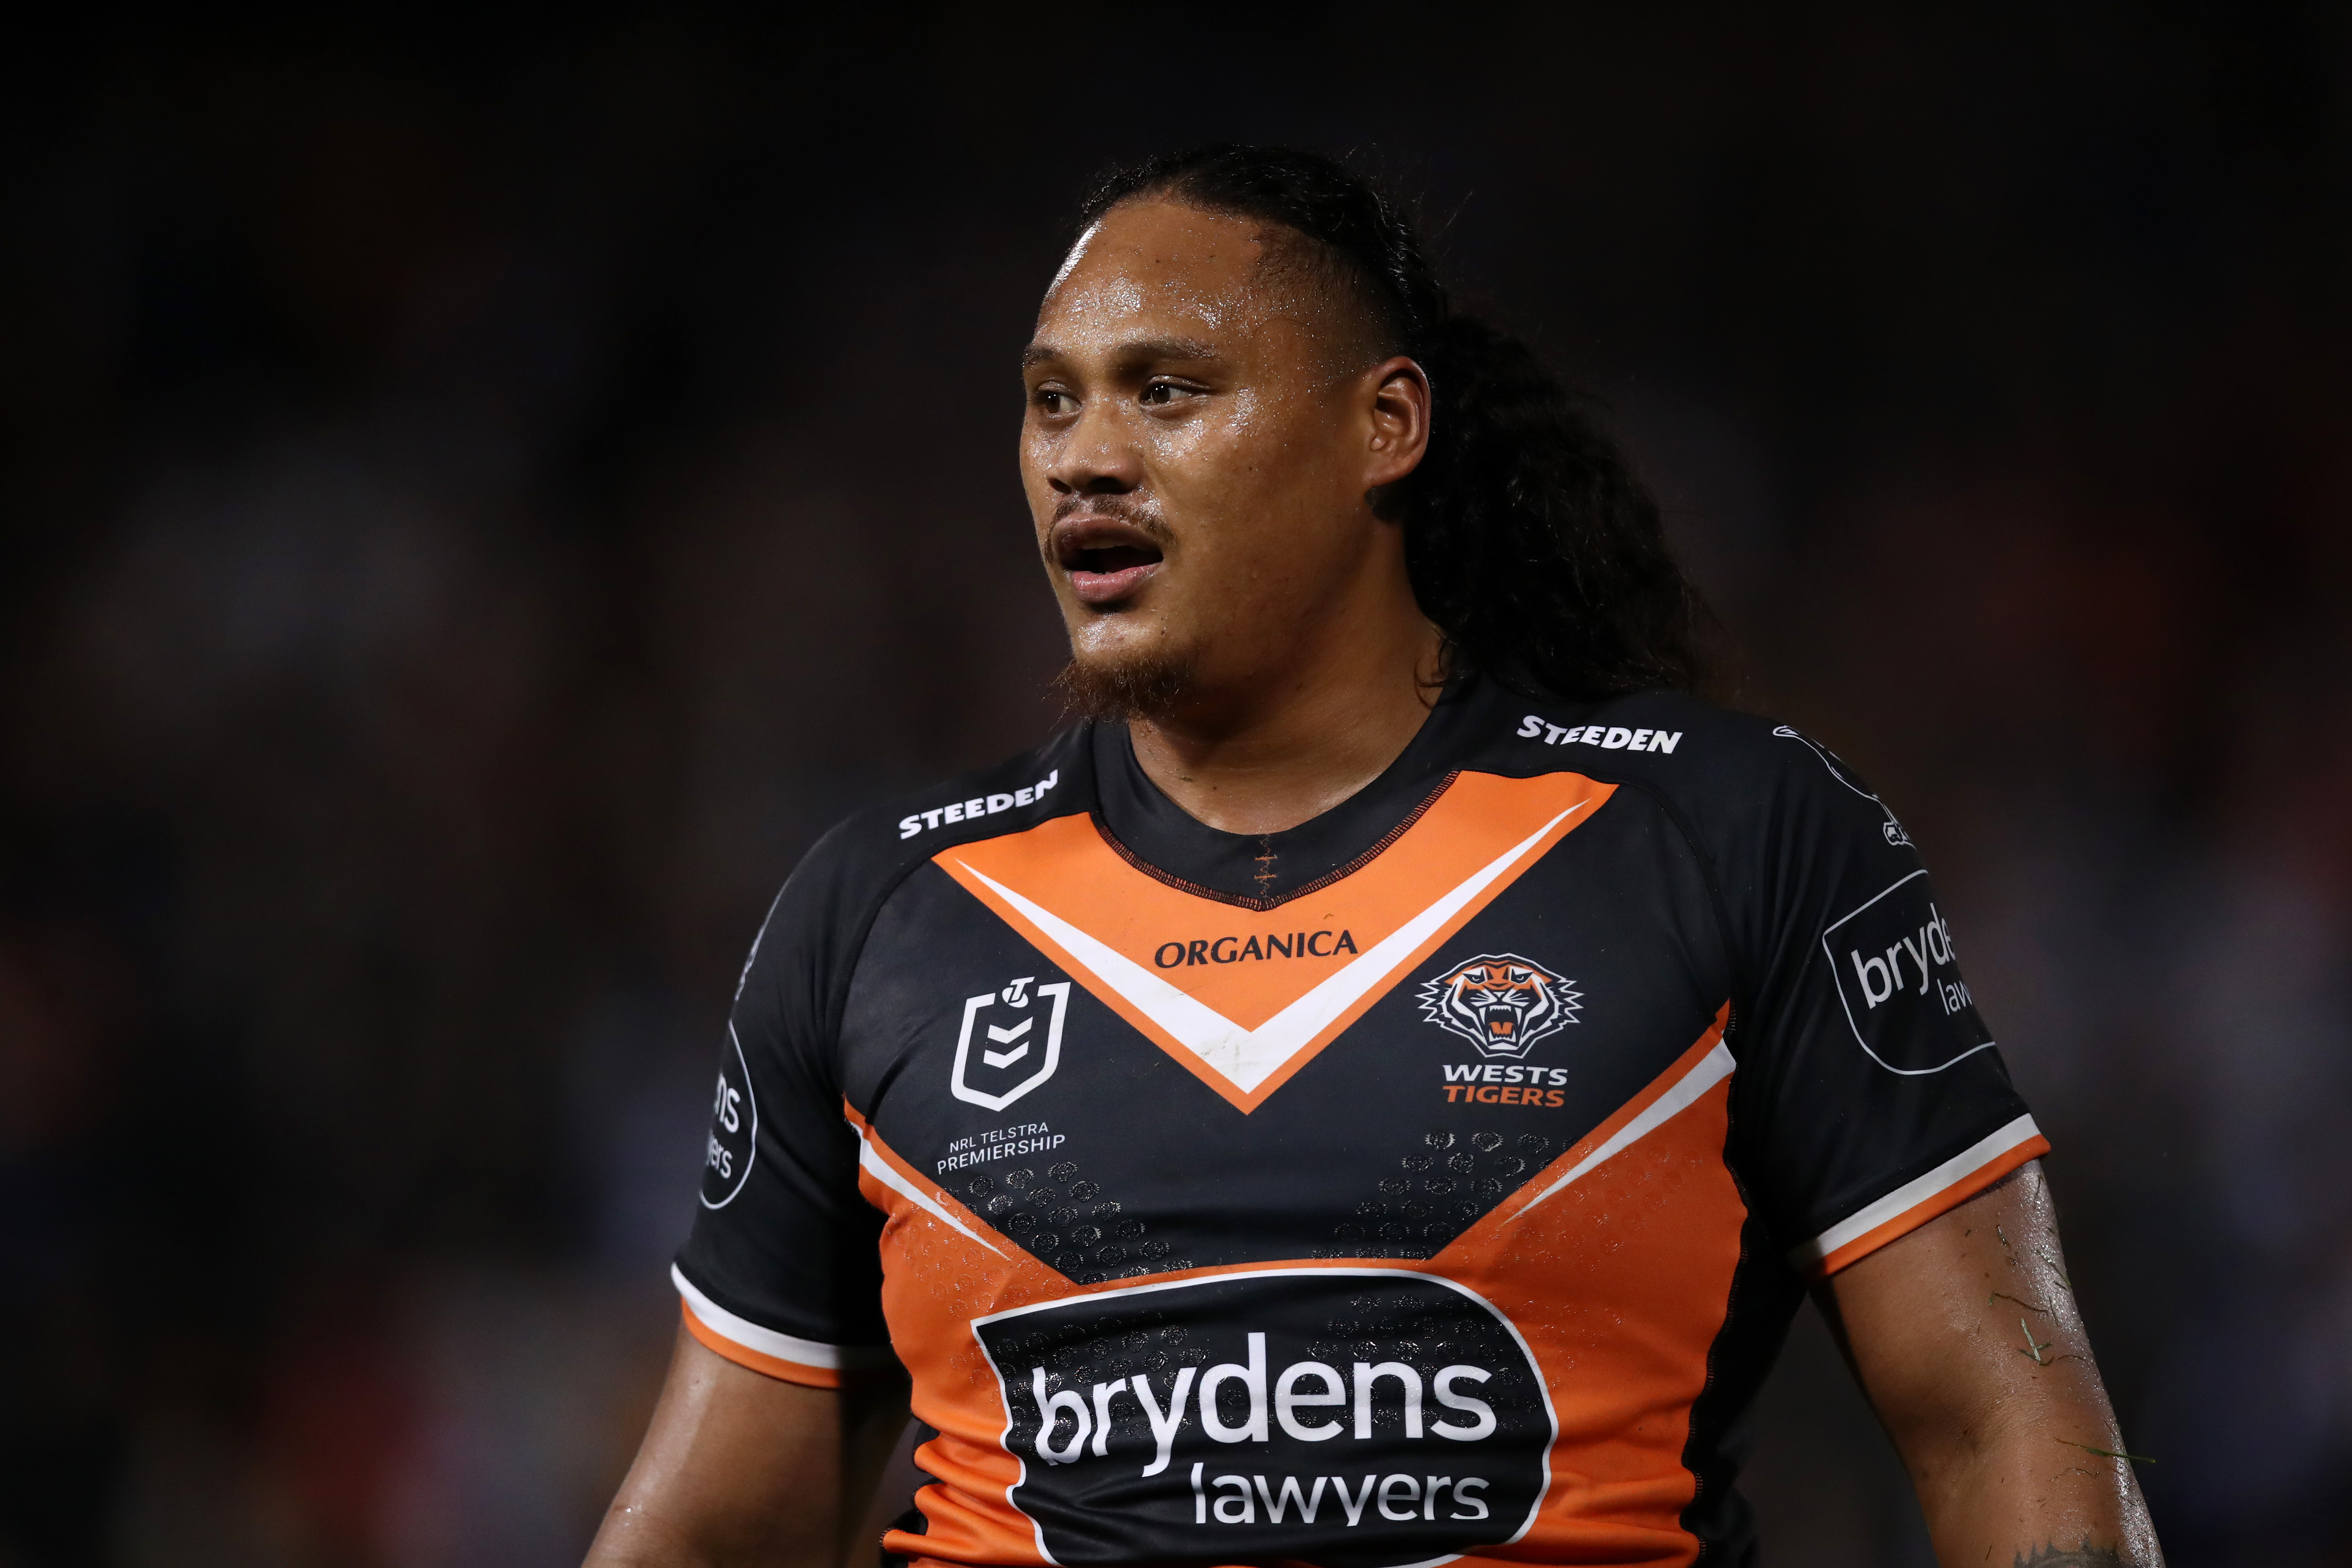 Luciano Leilua has left the Tigers to join the Cowboys mid-season.